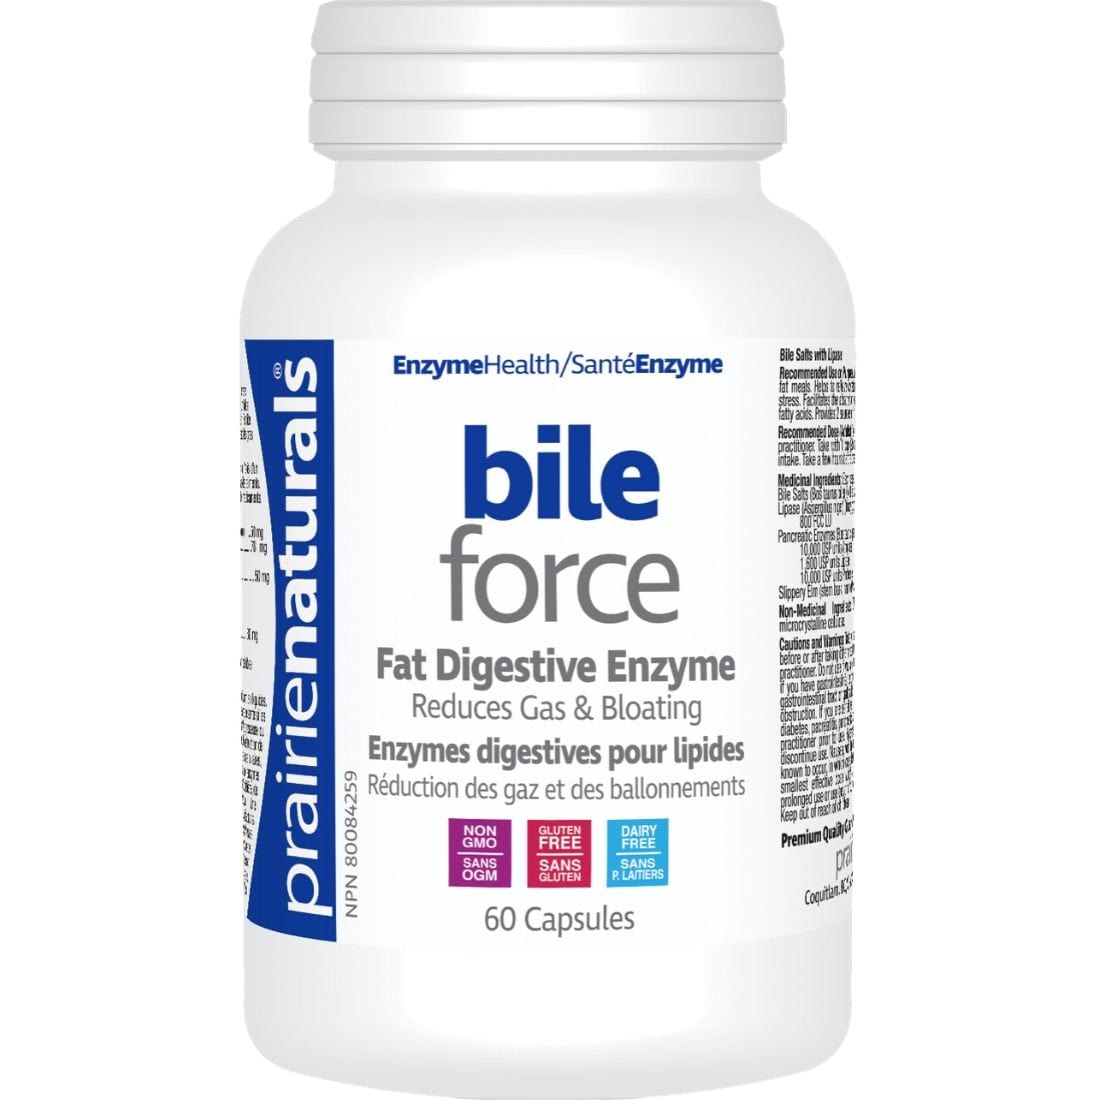 Prairie Naturals Bile-Force, Bile Salt with Lipase (Fat Digesting Enzyme)